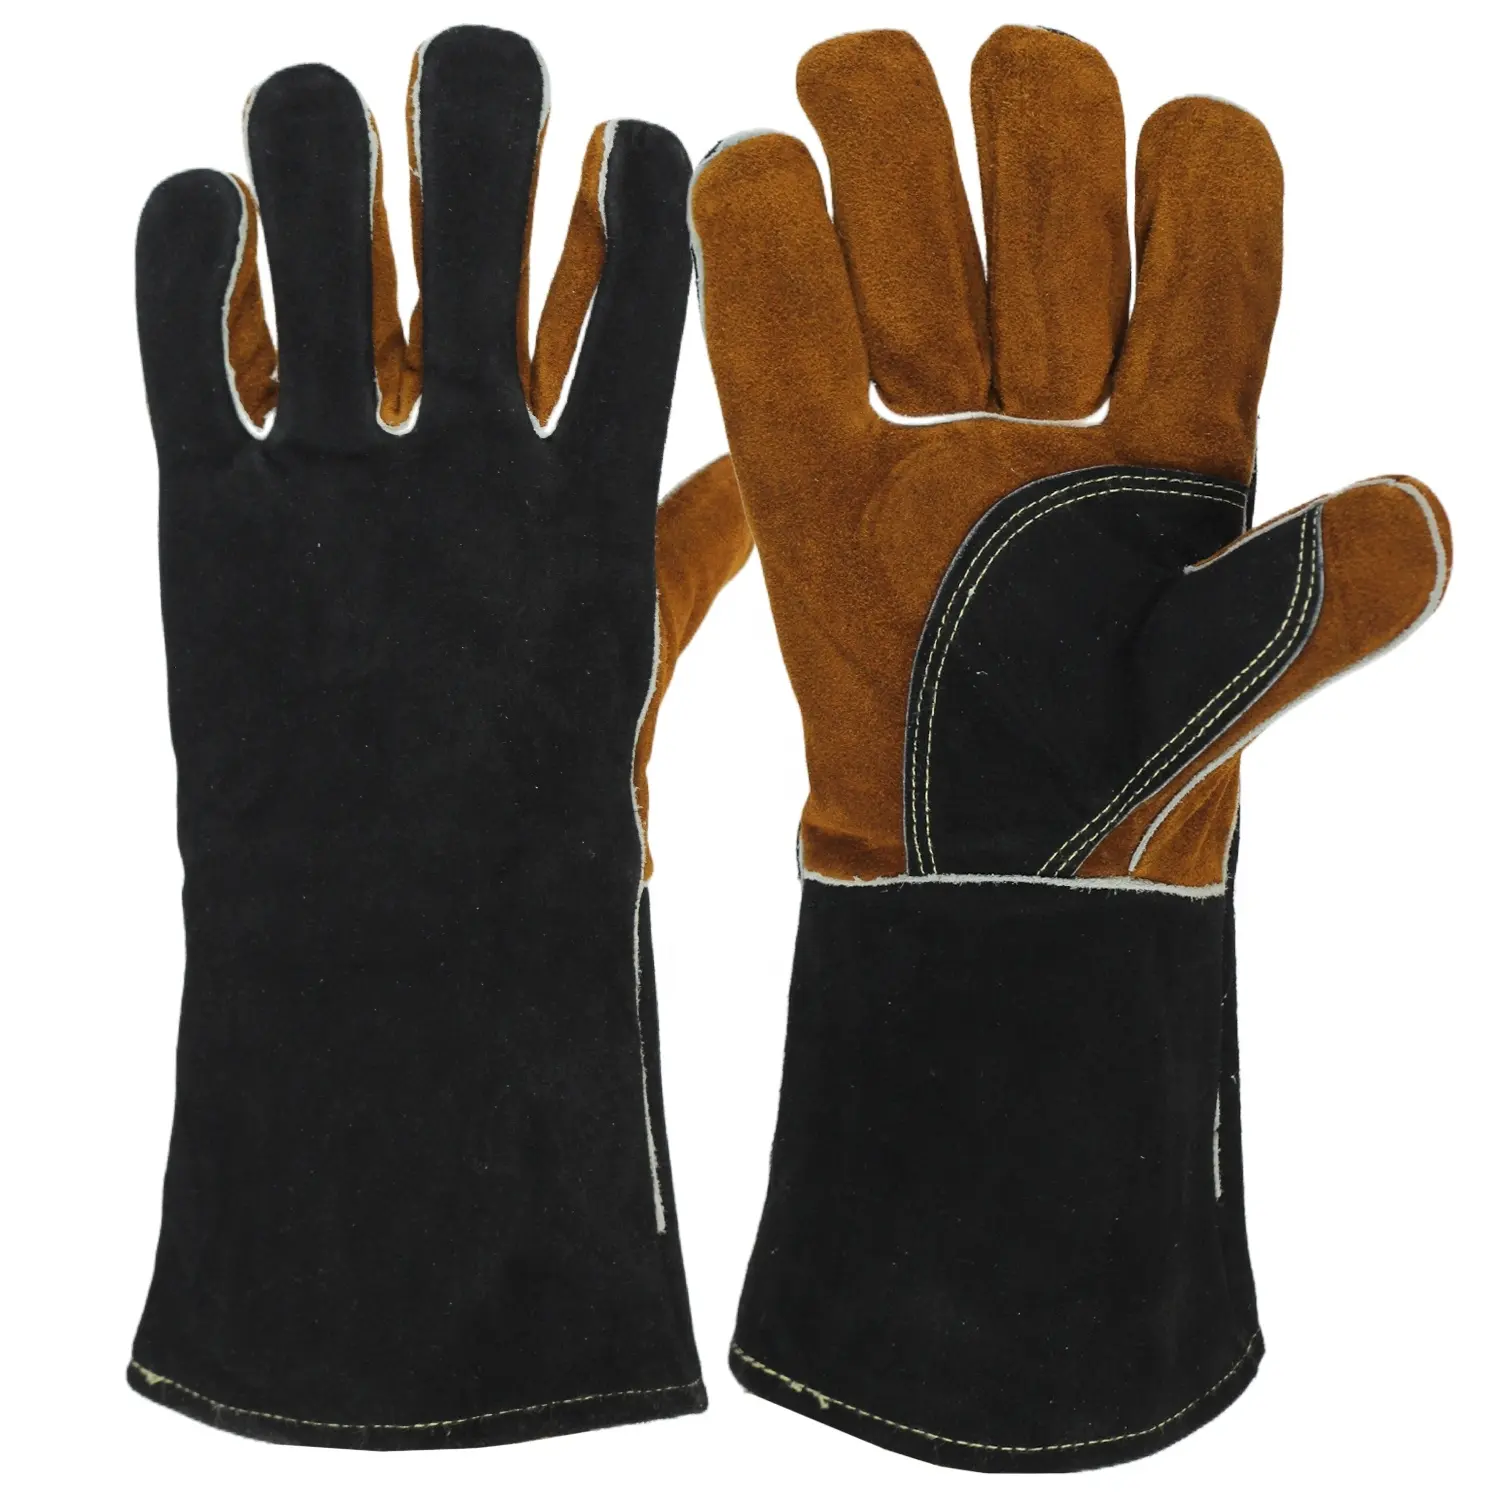 Wholesale welding gloves Cow Split Leather Protective Hand Welder Work Gloves For Fireplace Gloves BBQ